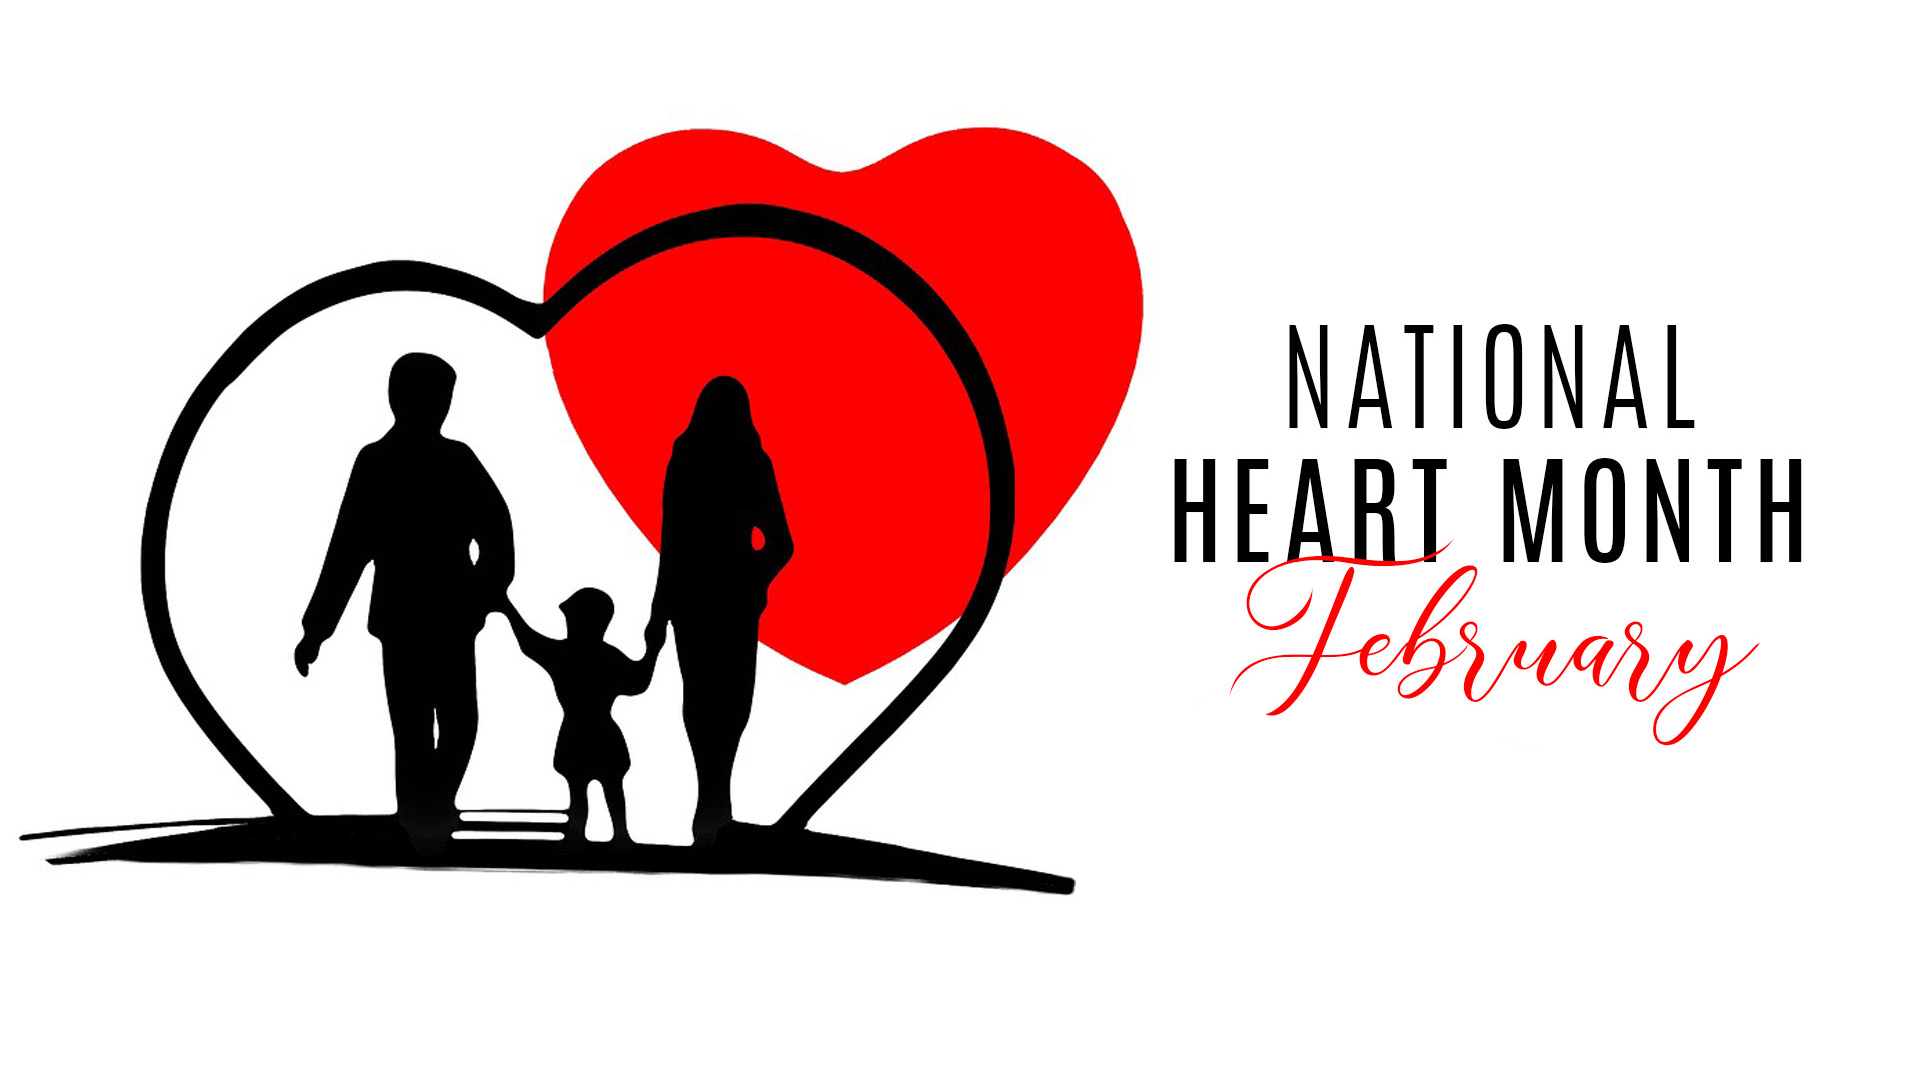 White background with a sketched family surrounded by a heart and a solid red heart overlapping the sketch. National Heart Month February is on the right hand side of the graphic.